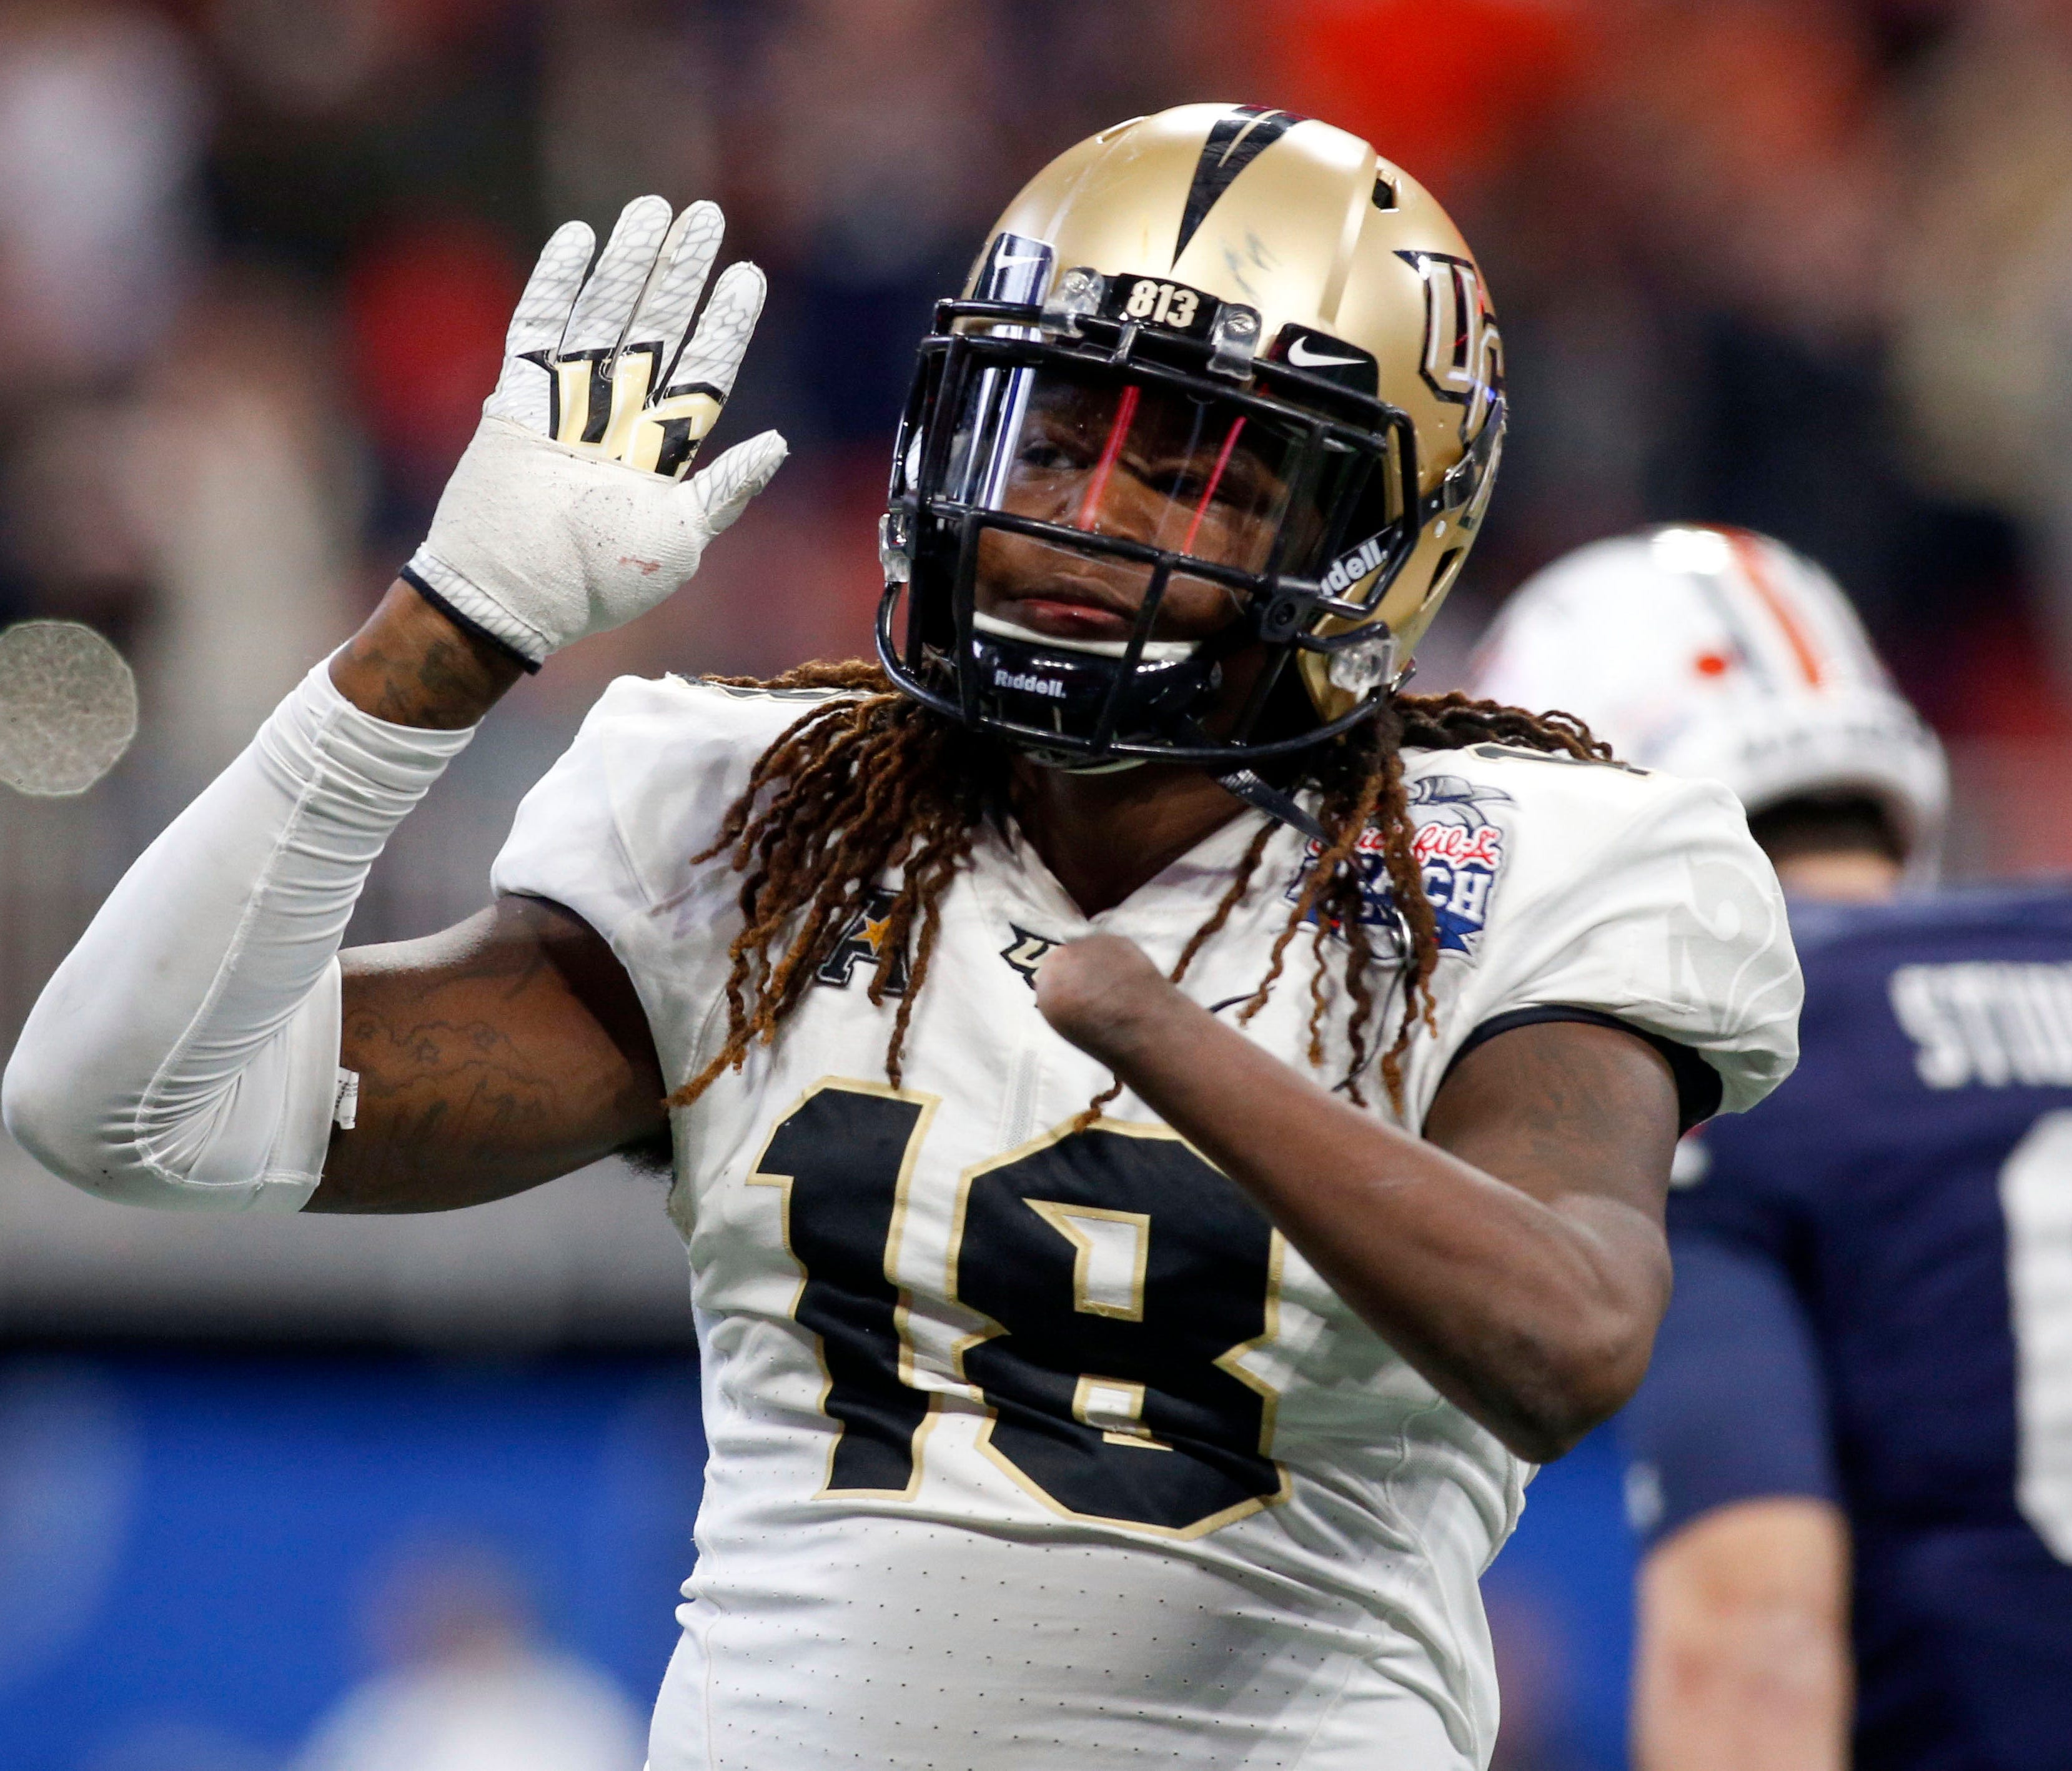 Shaquem Griffin turned heads by putting up 20 reps on the bench press at the NFL scouting combine.